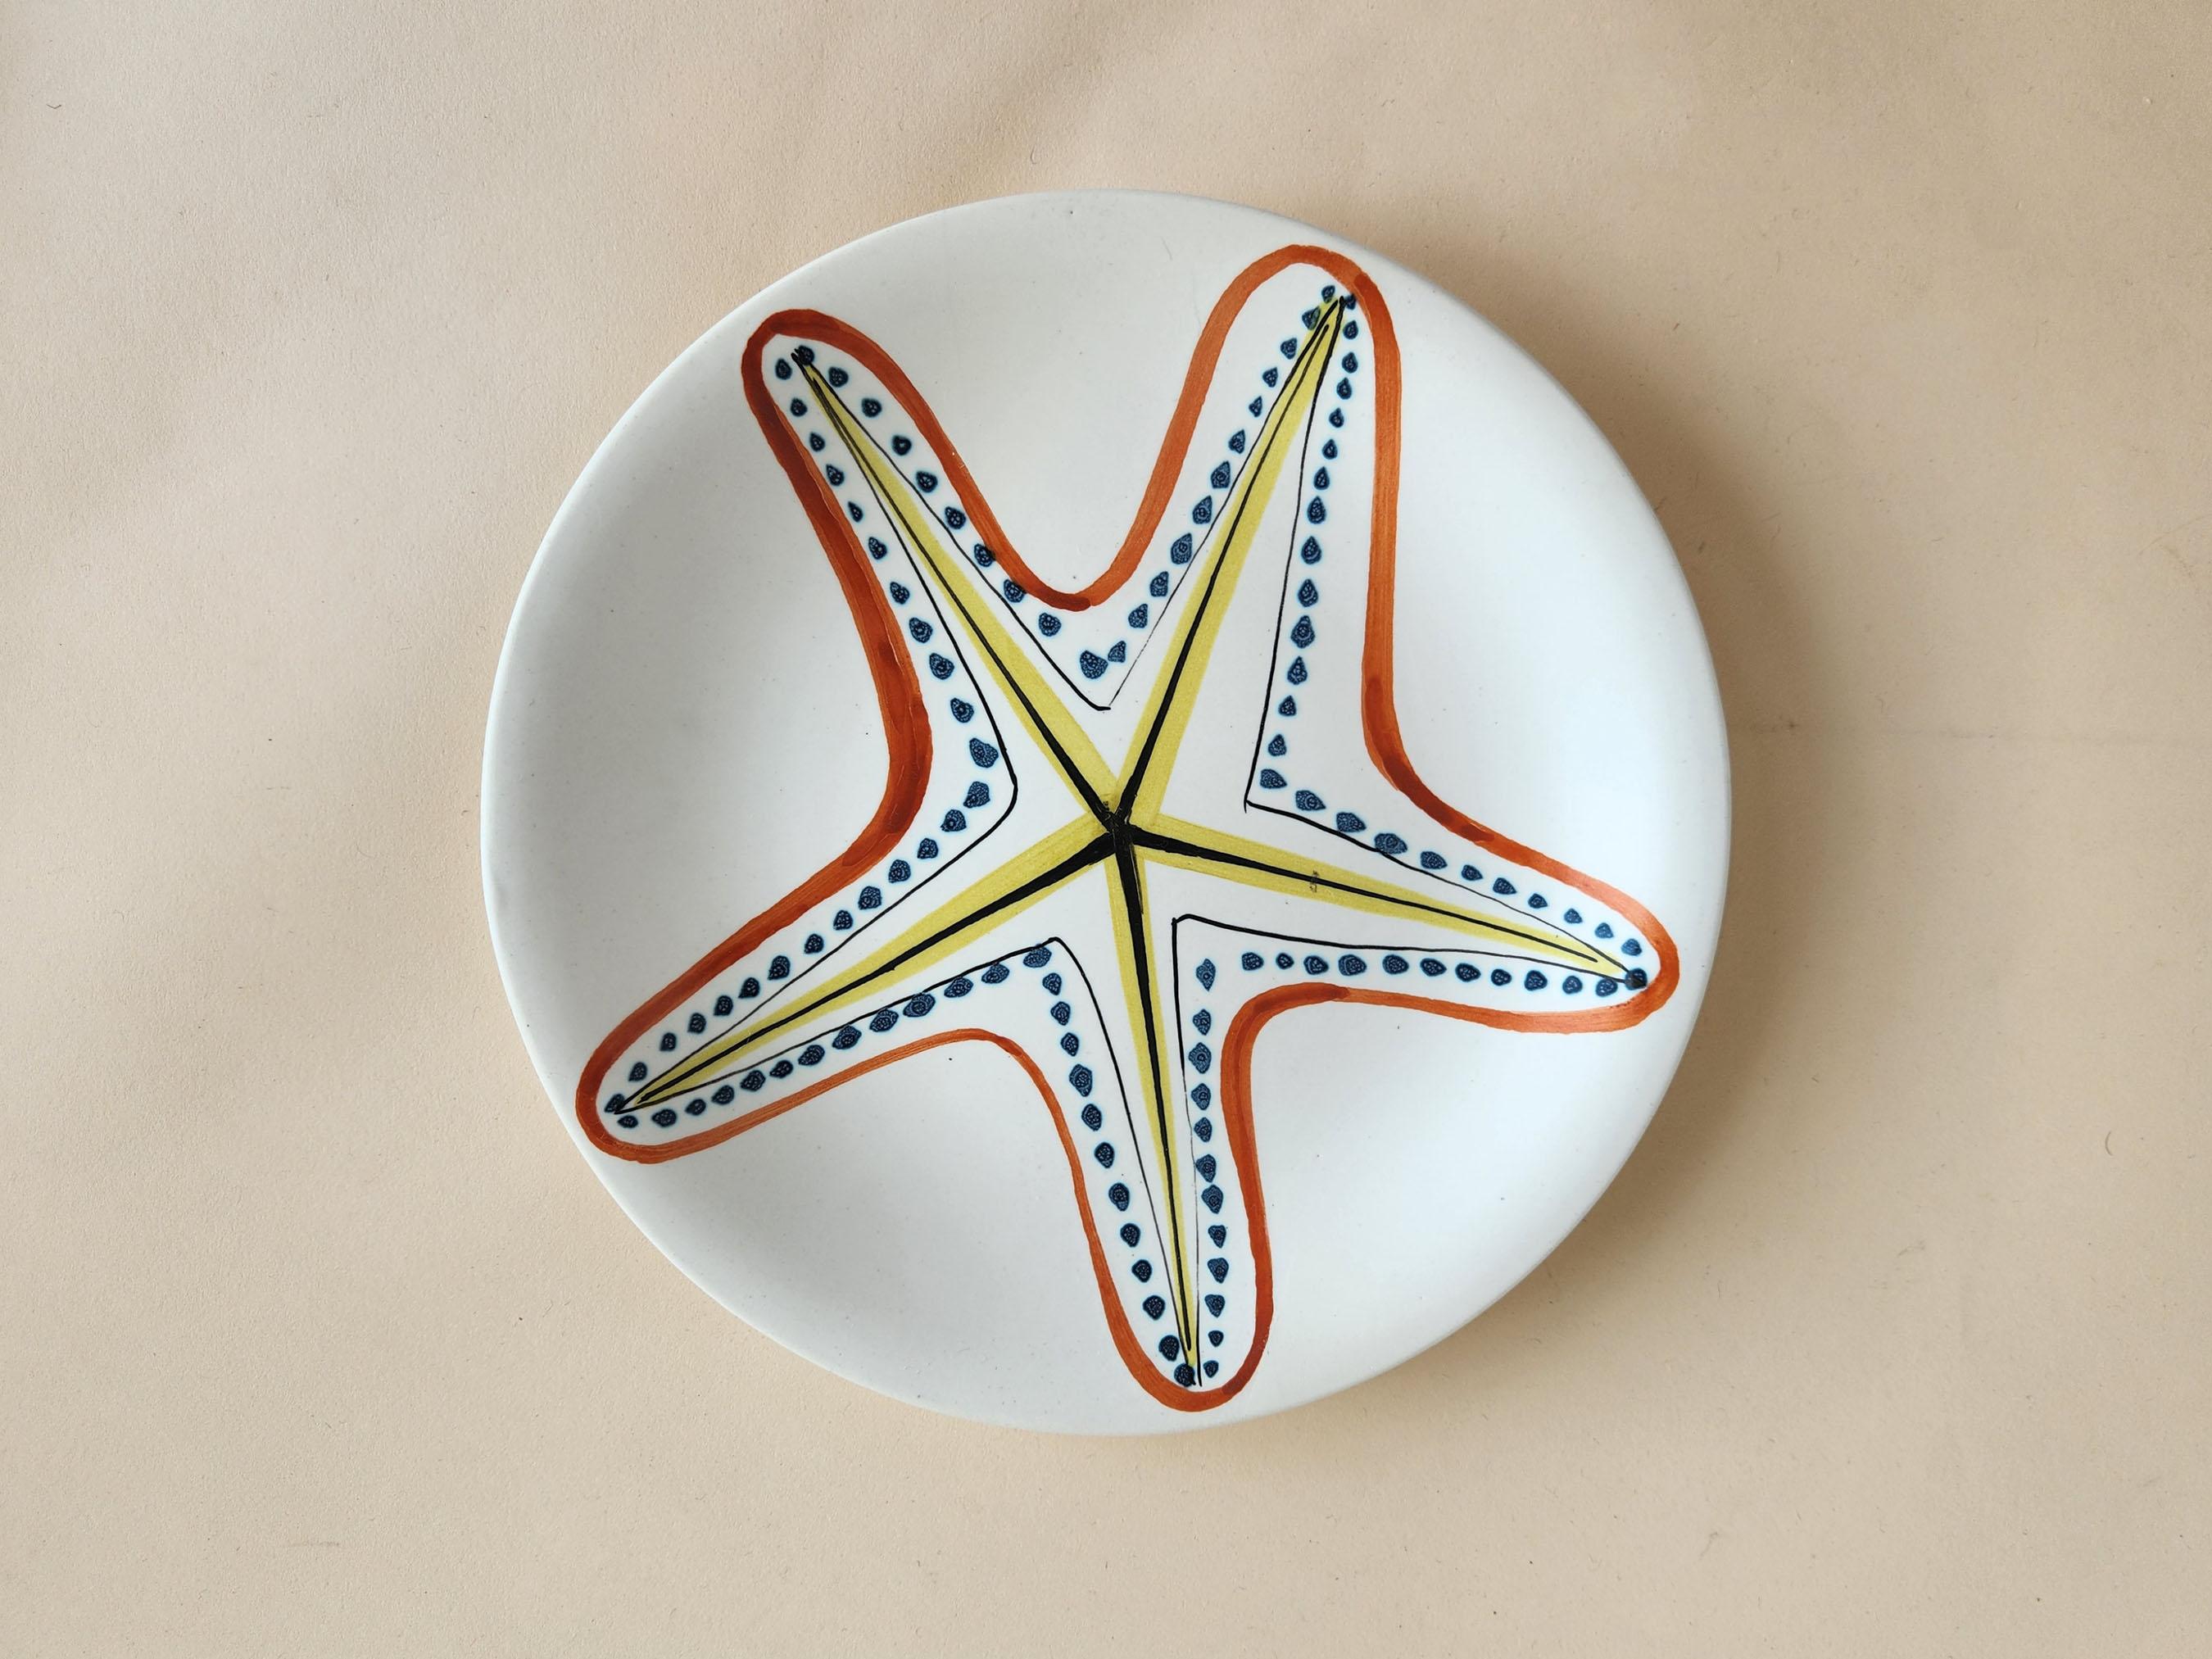 Vintage Ceramic Plate with Sea Star by Roger Capron - Vallauris, France

Roger Capron was in influential French ceramicist, known for his tiled tables and his use of recurring motifs such as stylized branches and geometrical suns.   He was born in